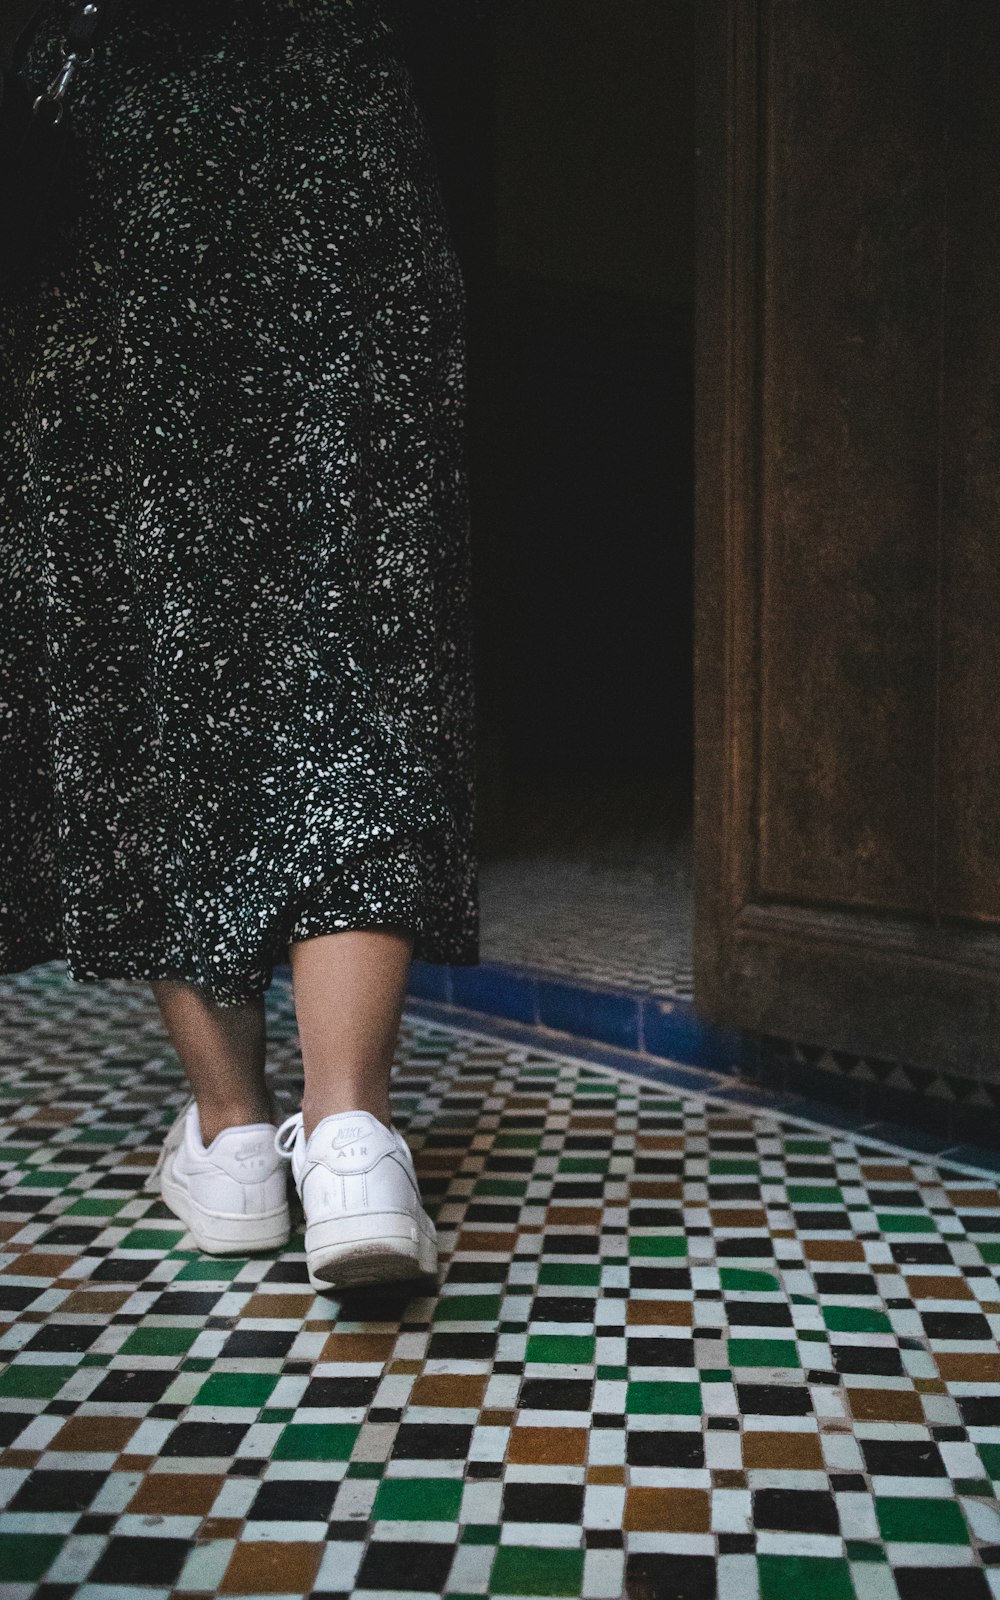 a close up of a person walking on a tiled floor